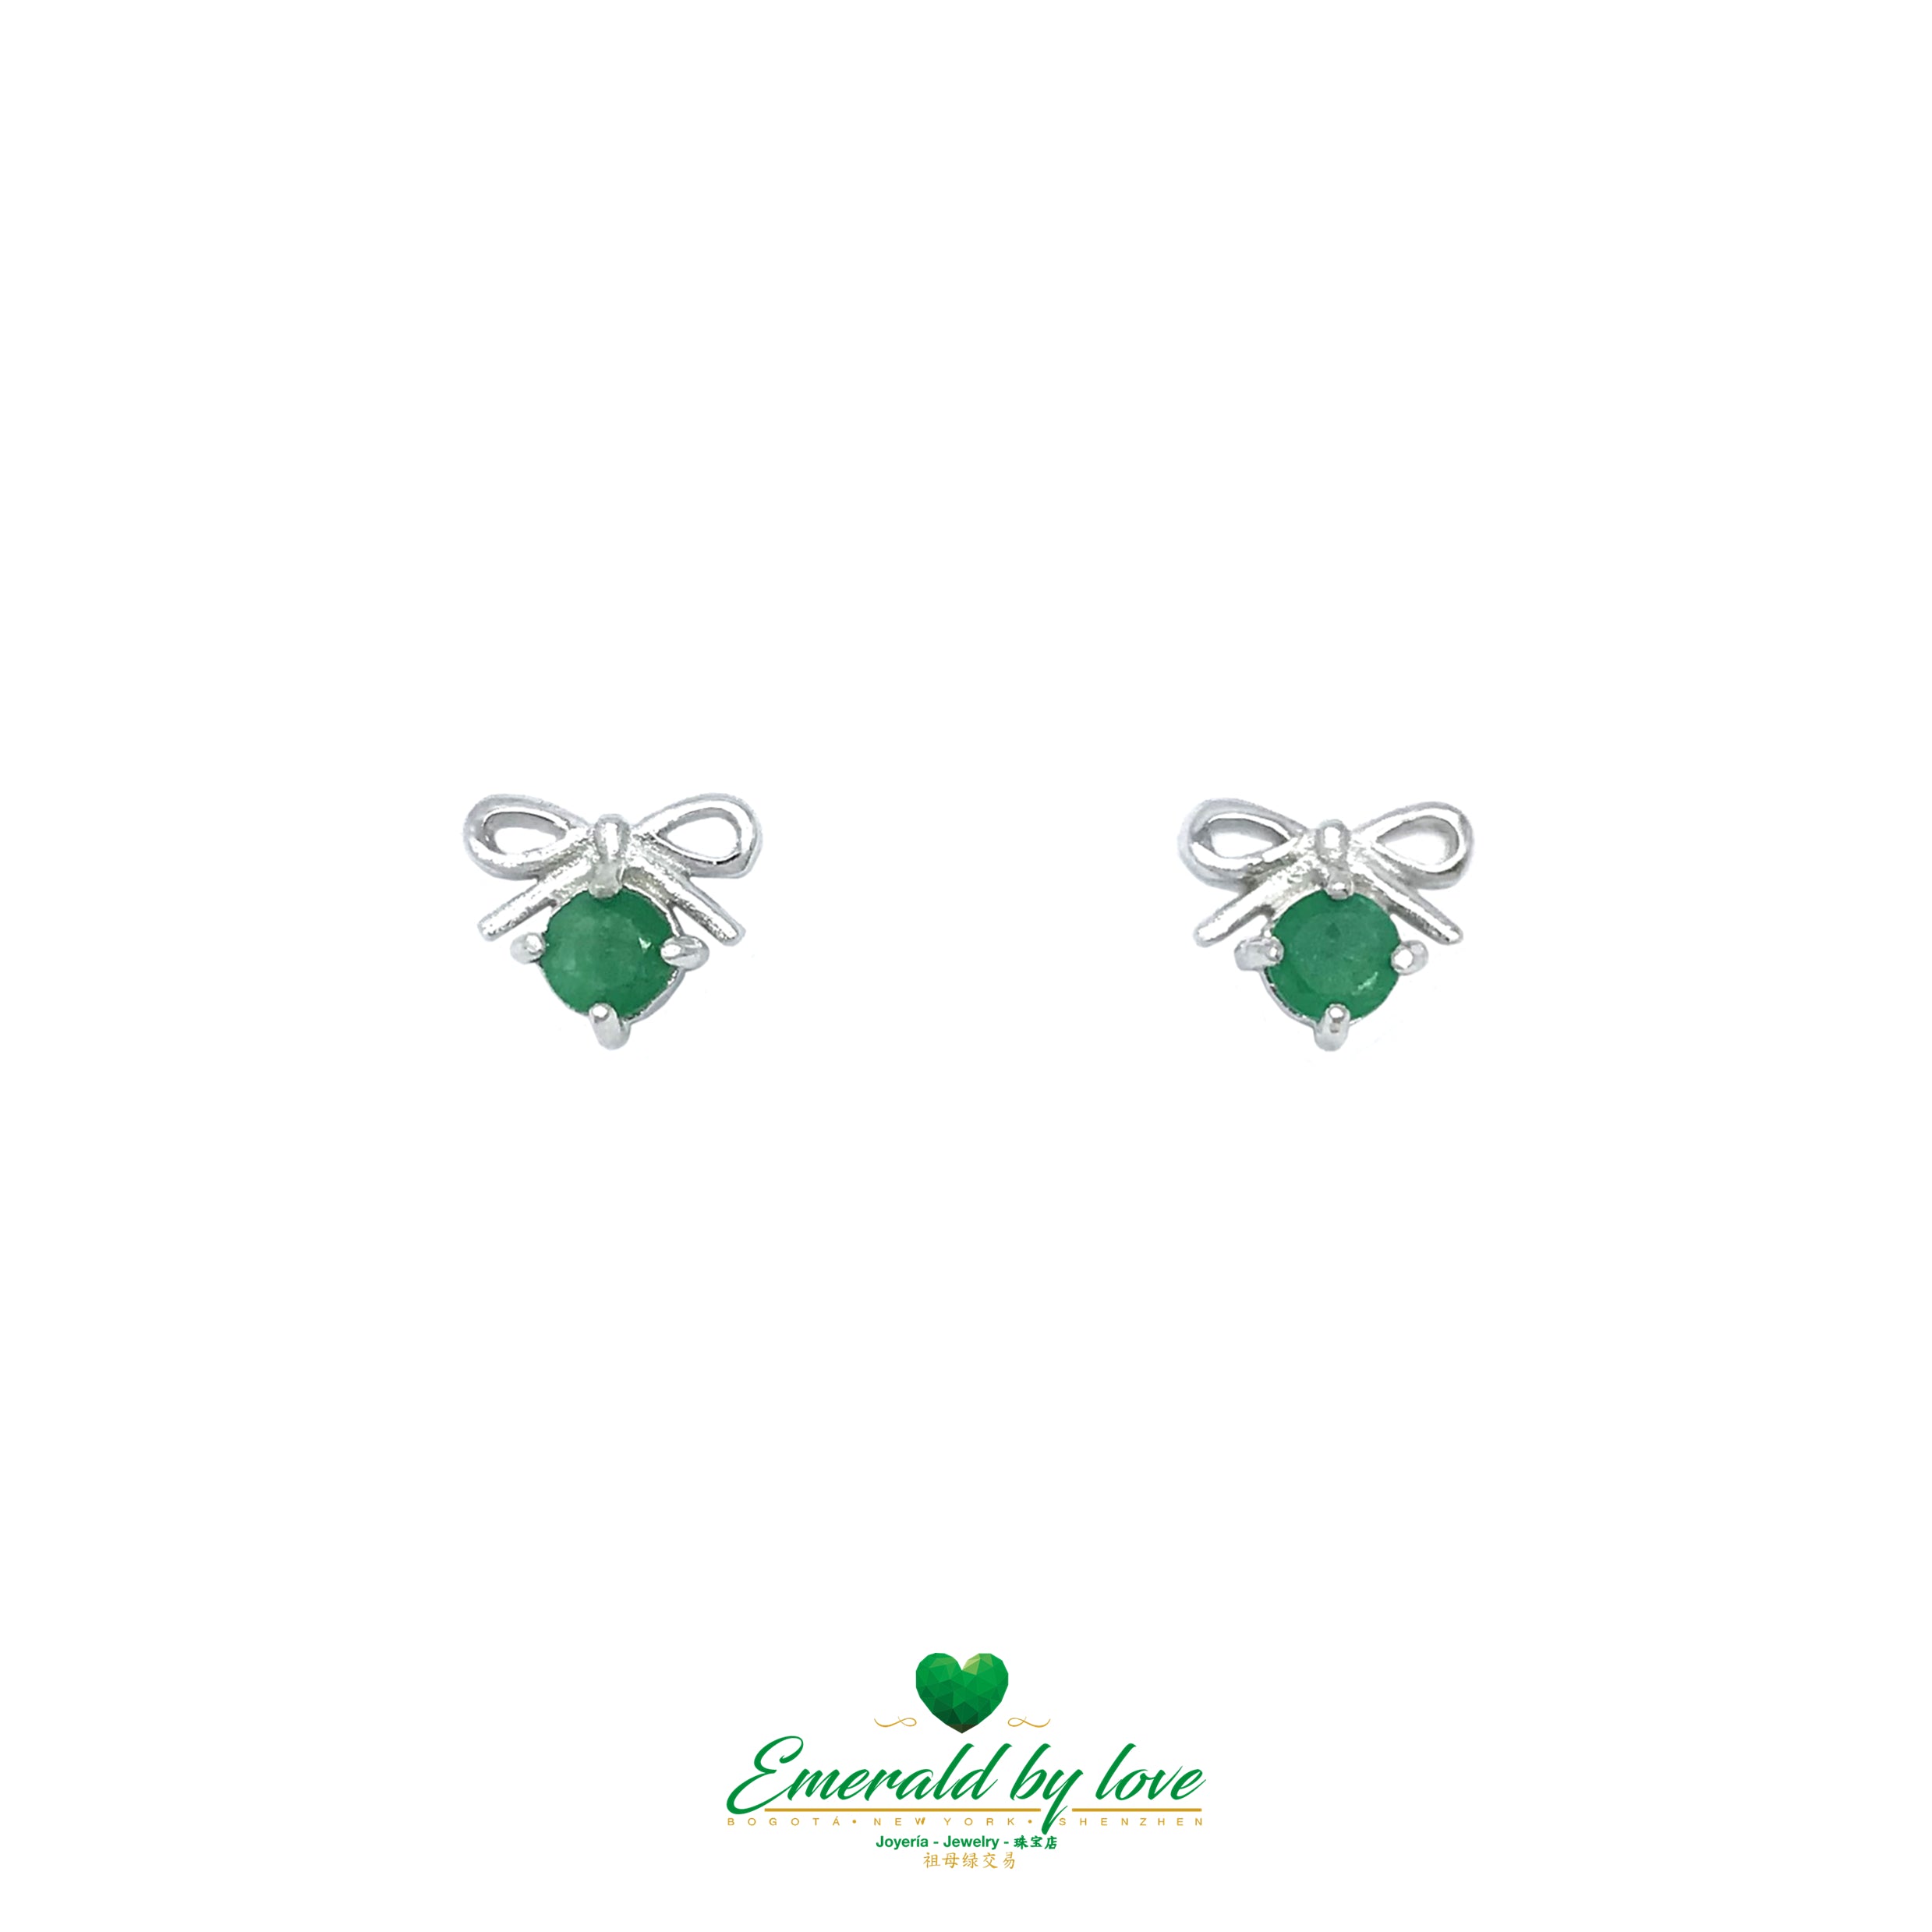 Tiny and Delicate Bow Design Sterling Silver Stud Earrings with Colombian Emeralds